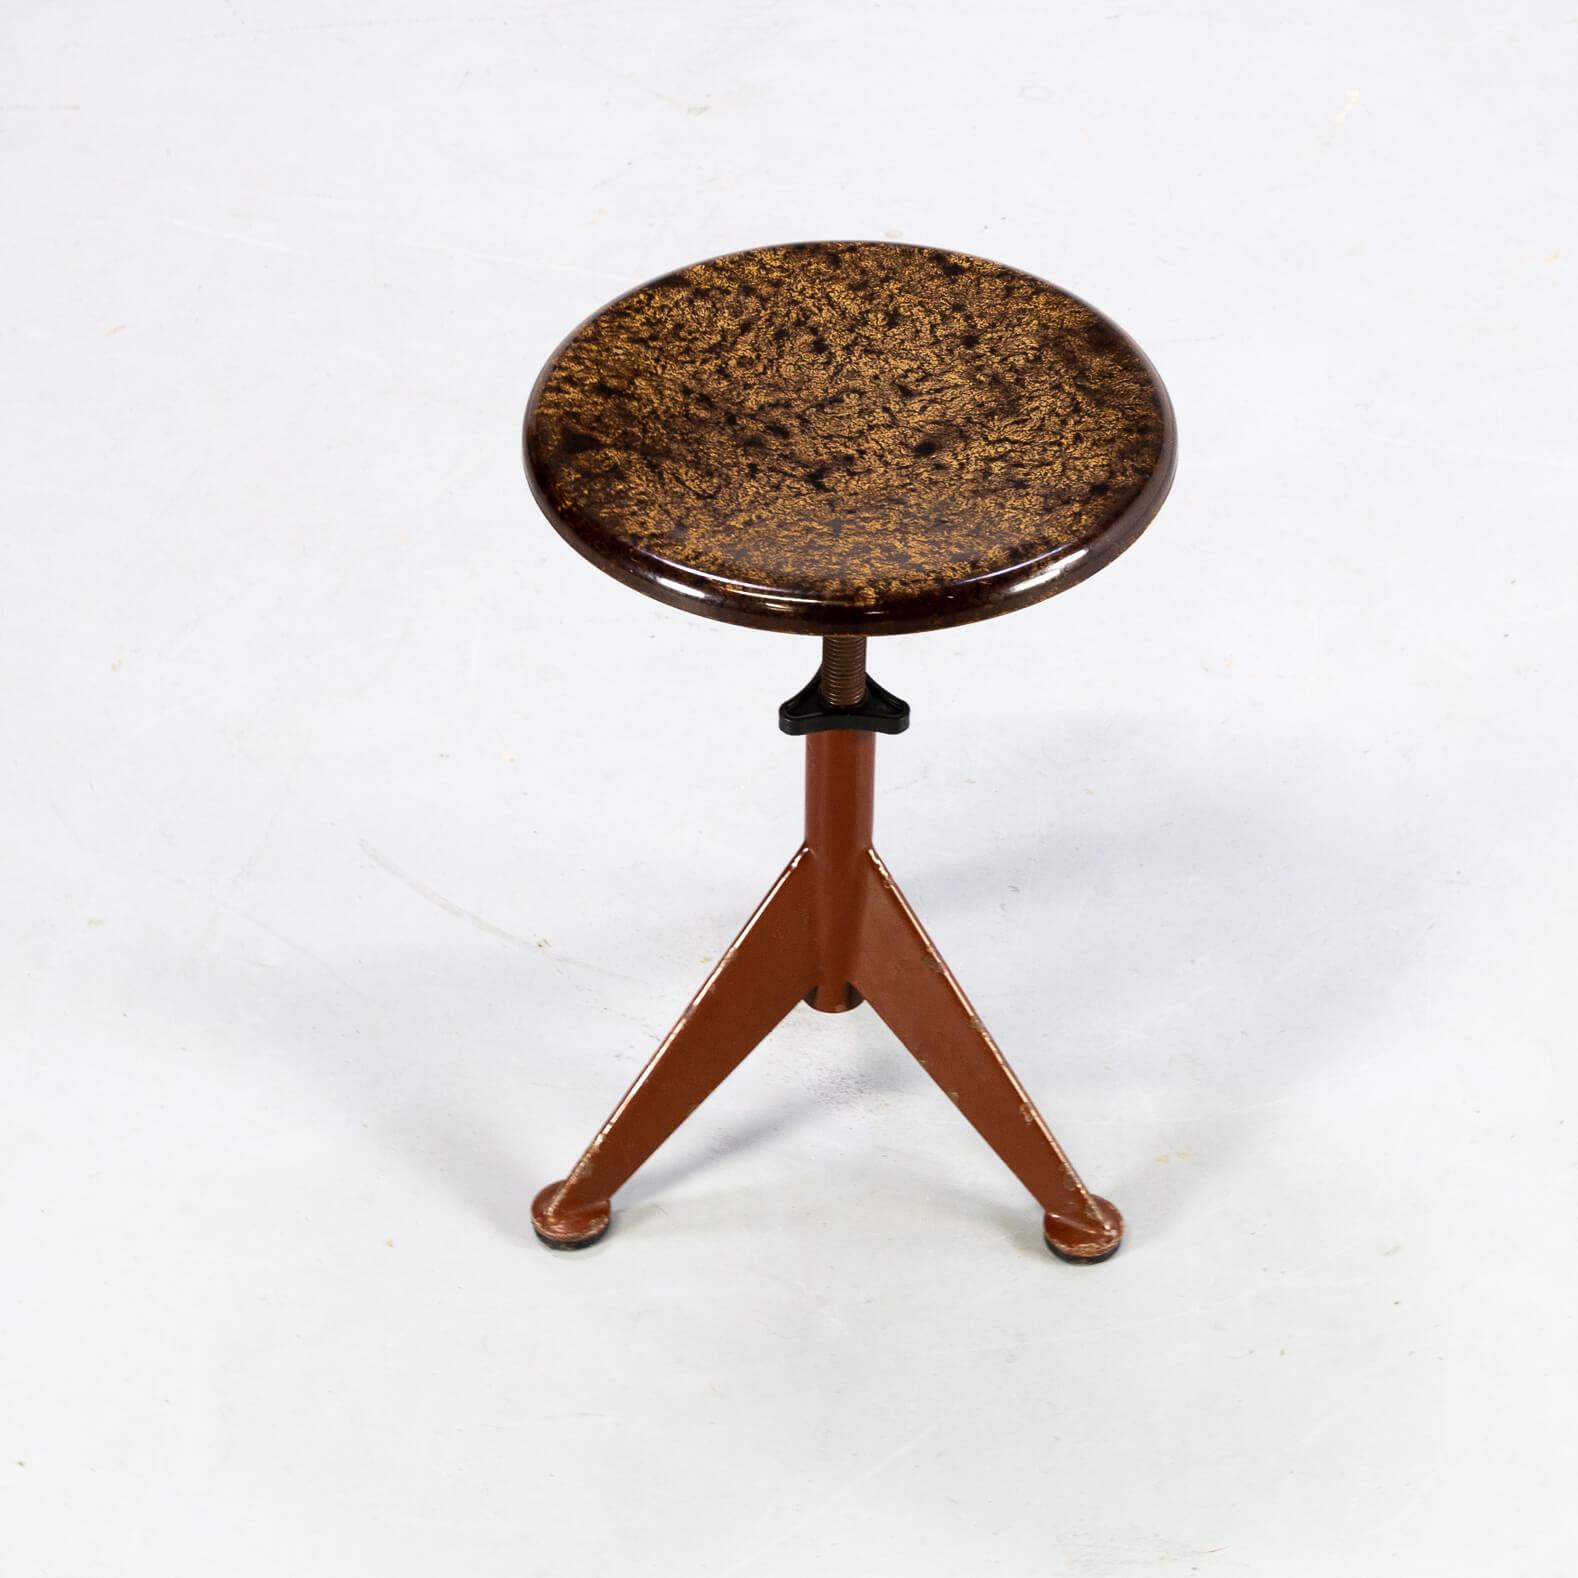 Swedish 1930s Rare Industrial Workshop Stool by AB Odelberg-Olson For Sale